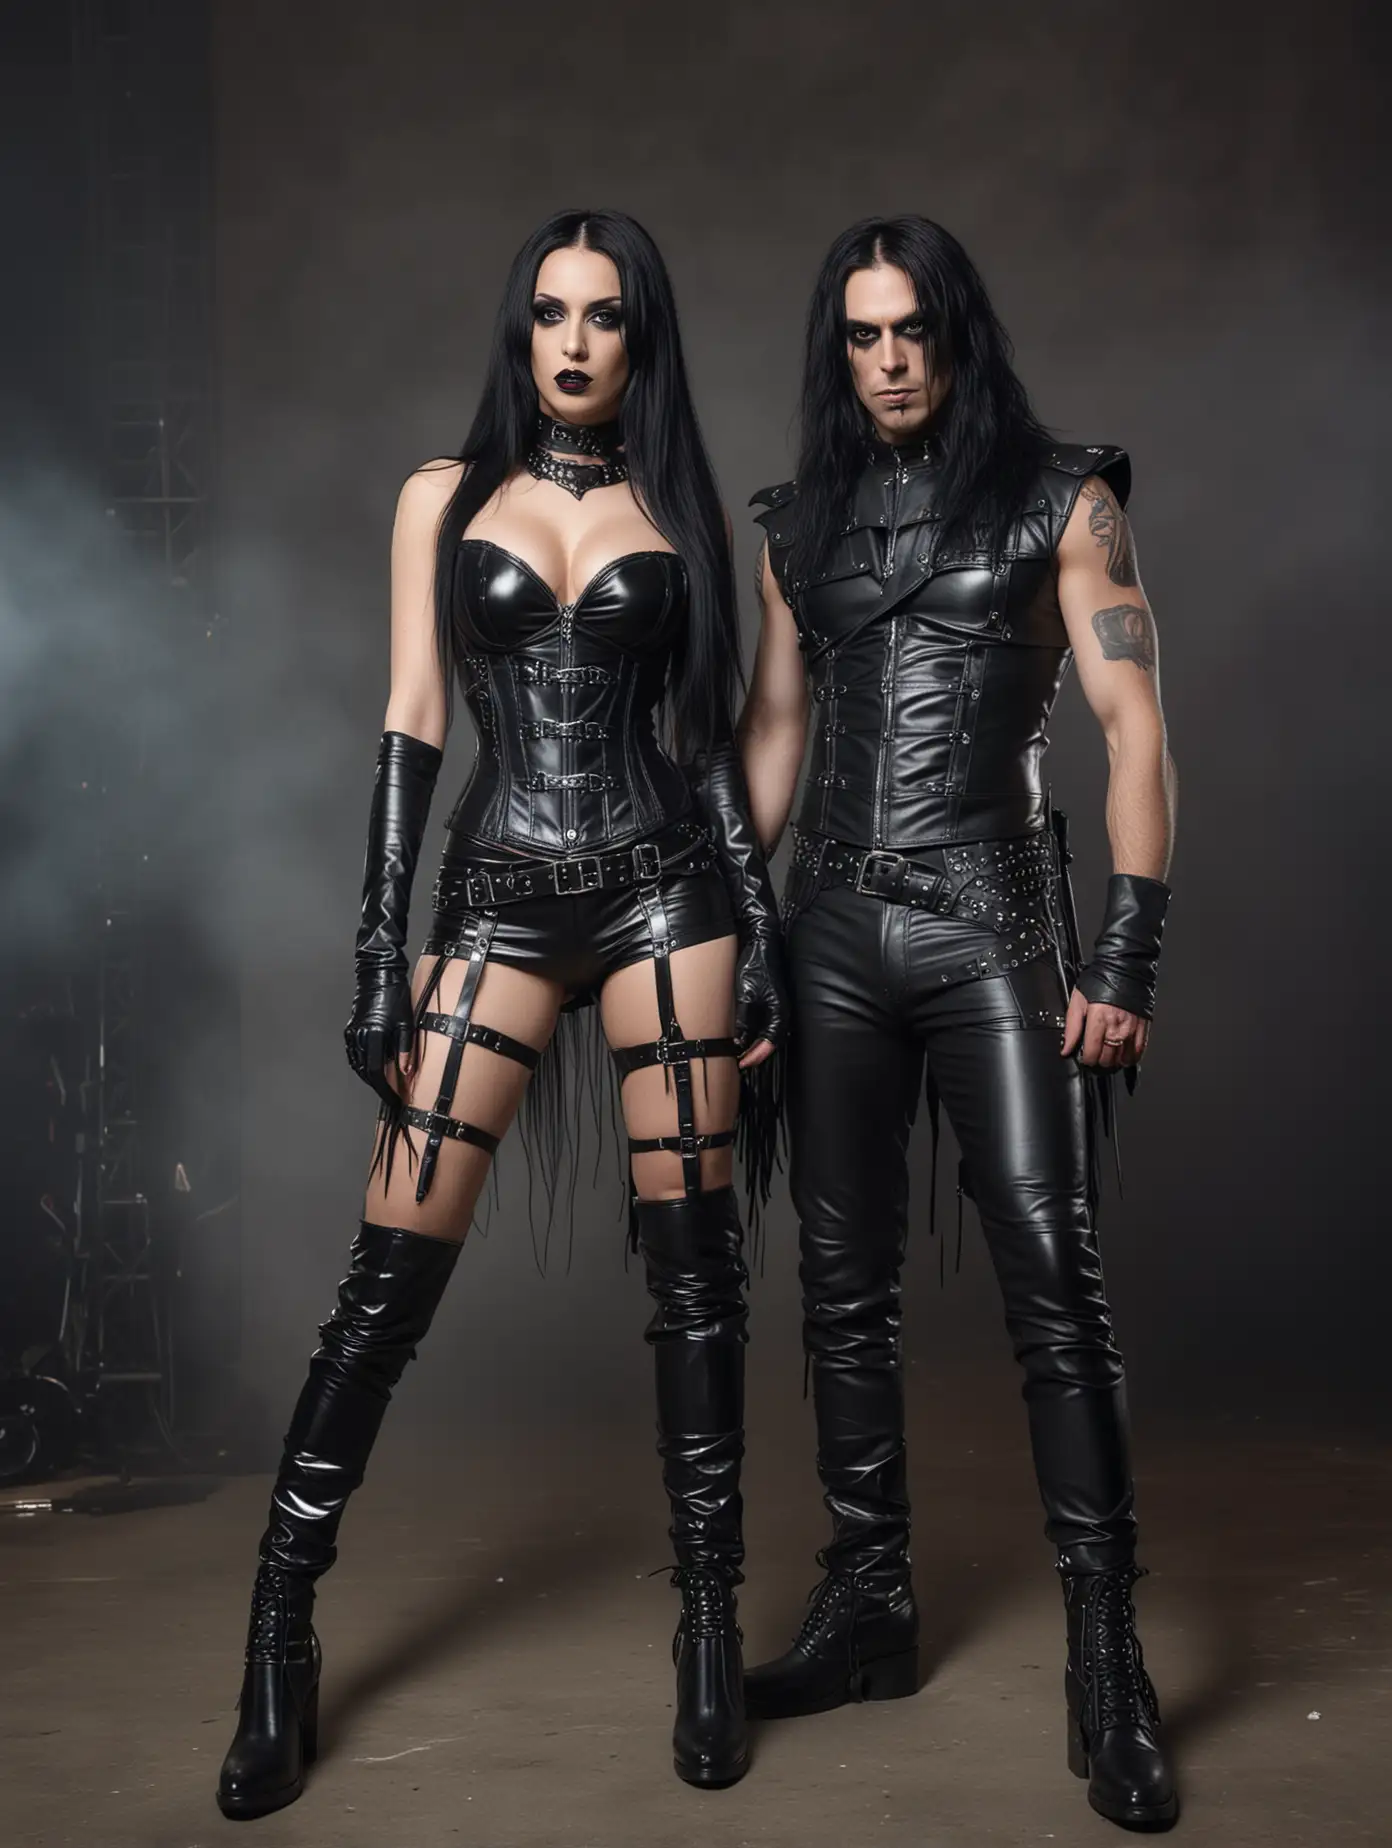 2 persons, a man and a woman. Gothic woman and a blackmetalhead rocker man. The woman wears a latex corset and miniskirt. The man wears leather pants and a bullet belt. Both of them has long black hair, smokey eye make up and long black nails. The surrounding is a heavy metal concert.